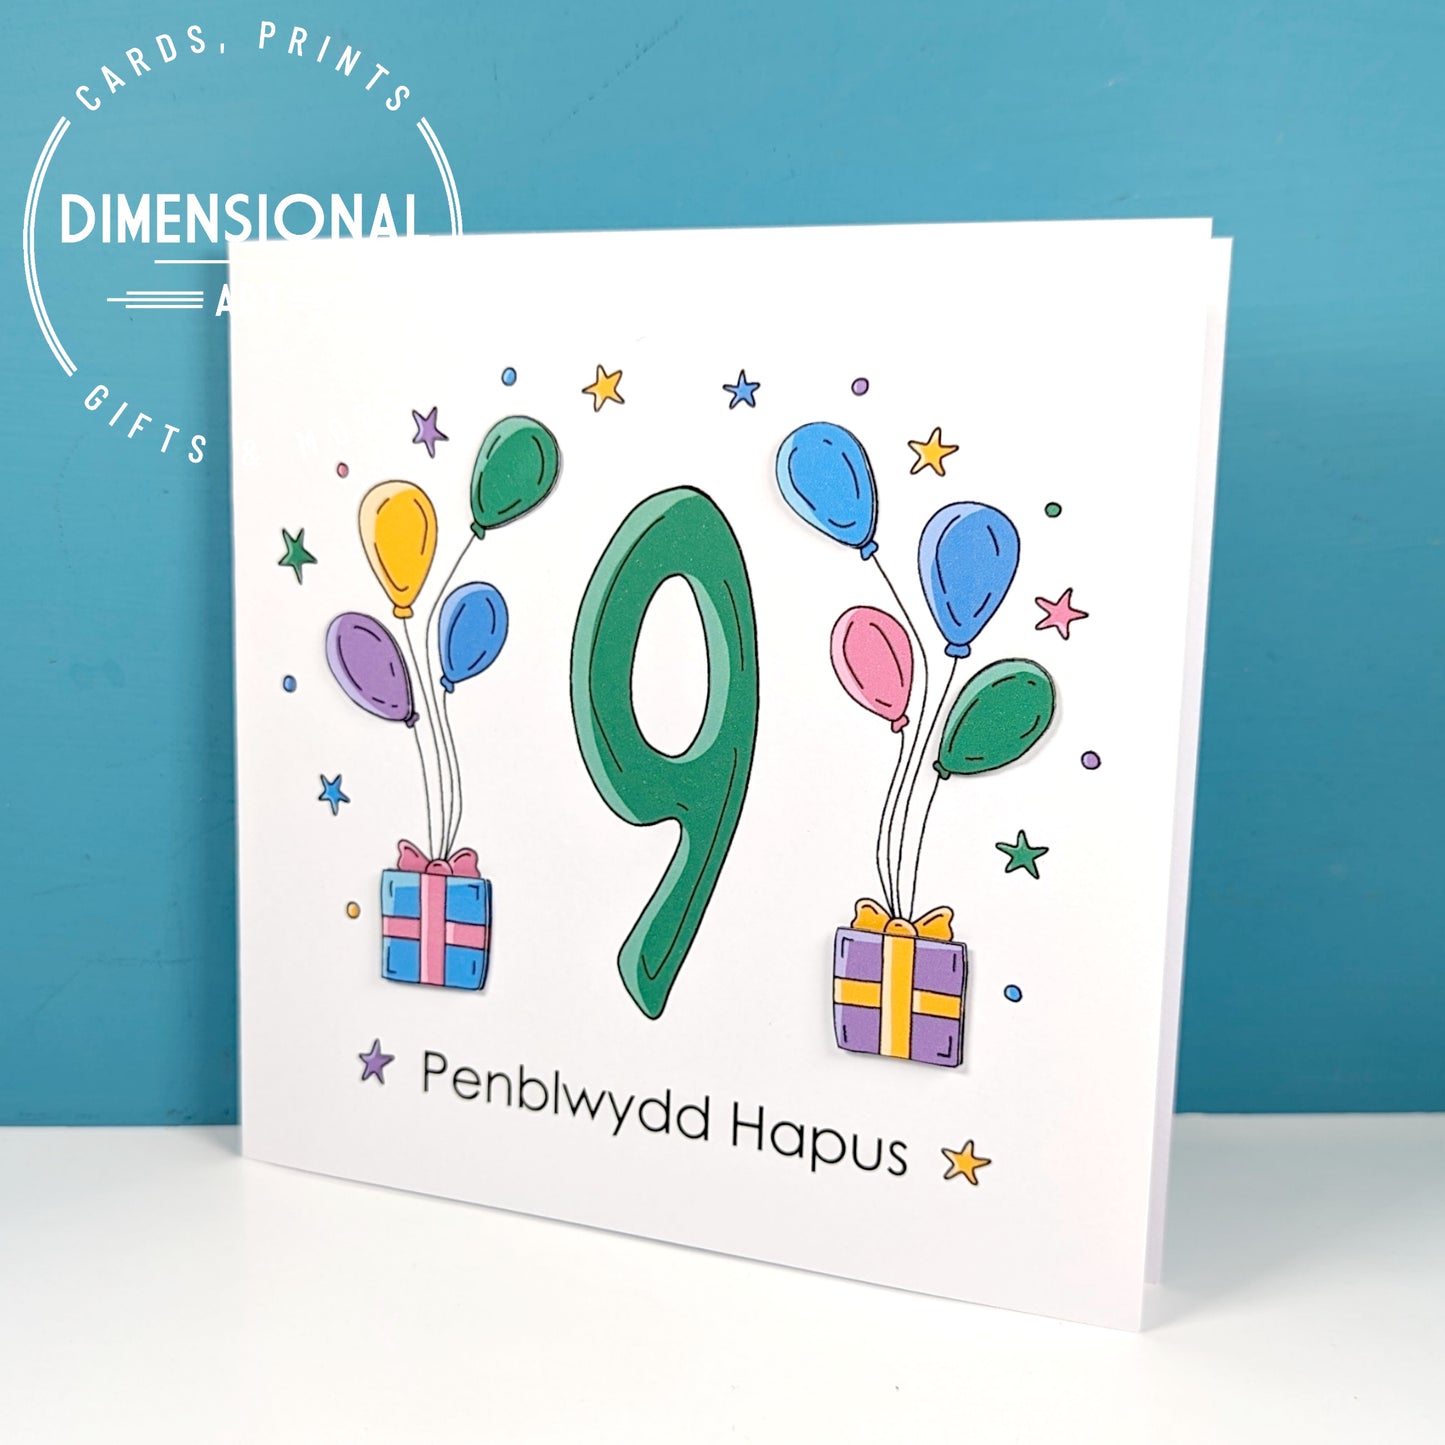 9th balloons and presents Penblwydd Hapus (Birthday) Card - Welsh